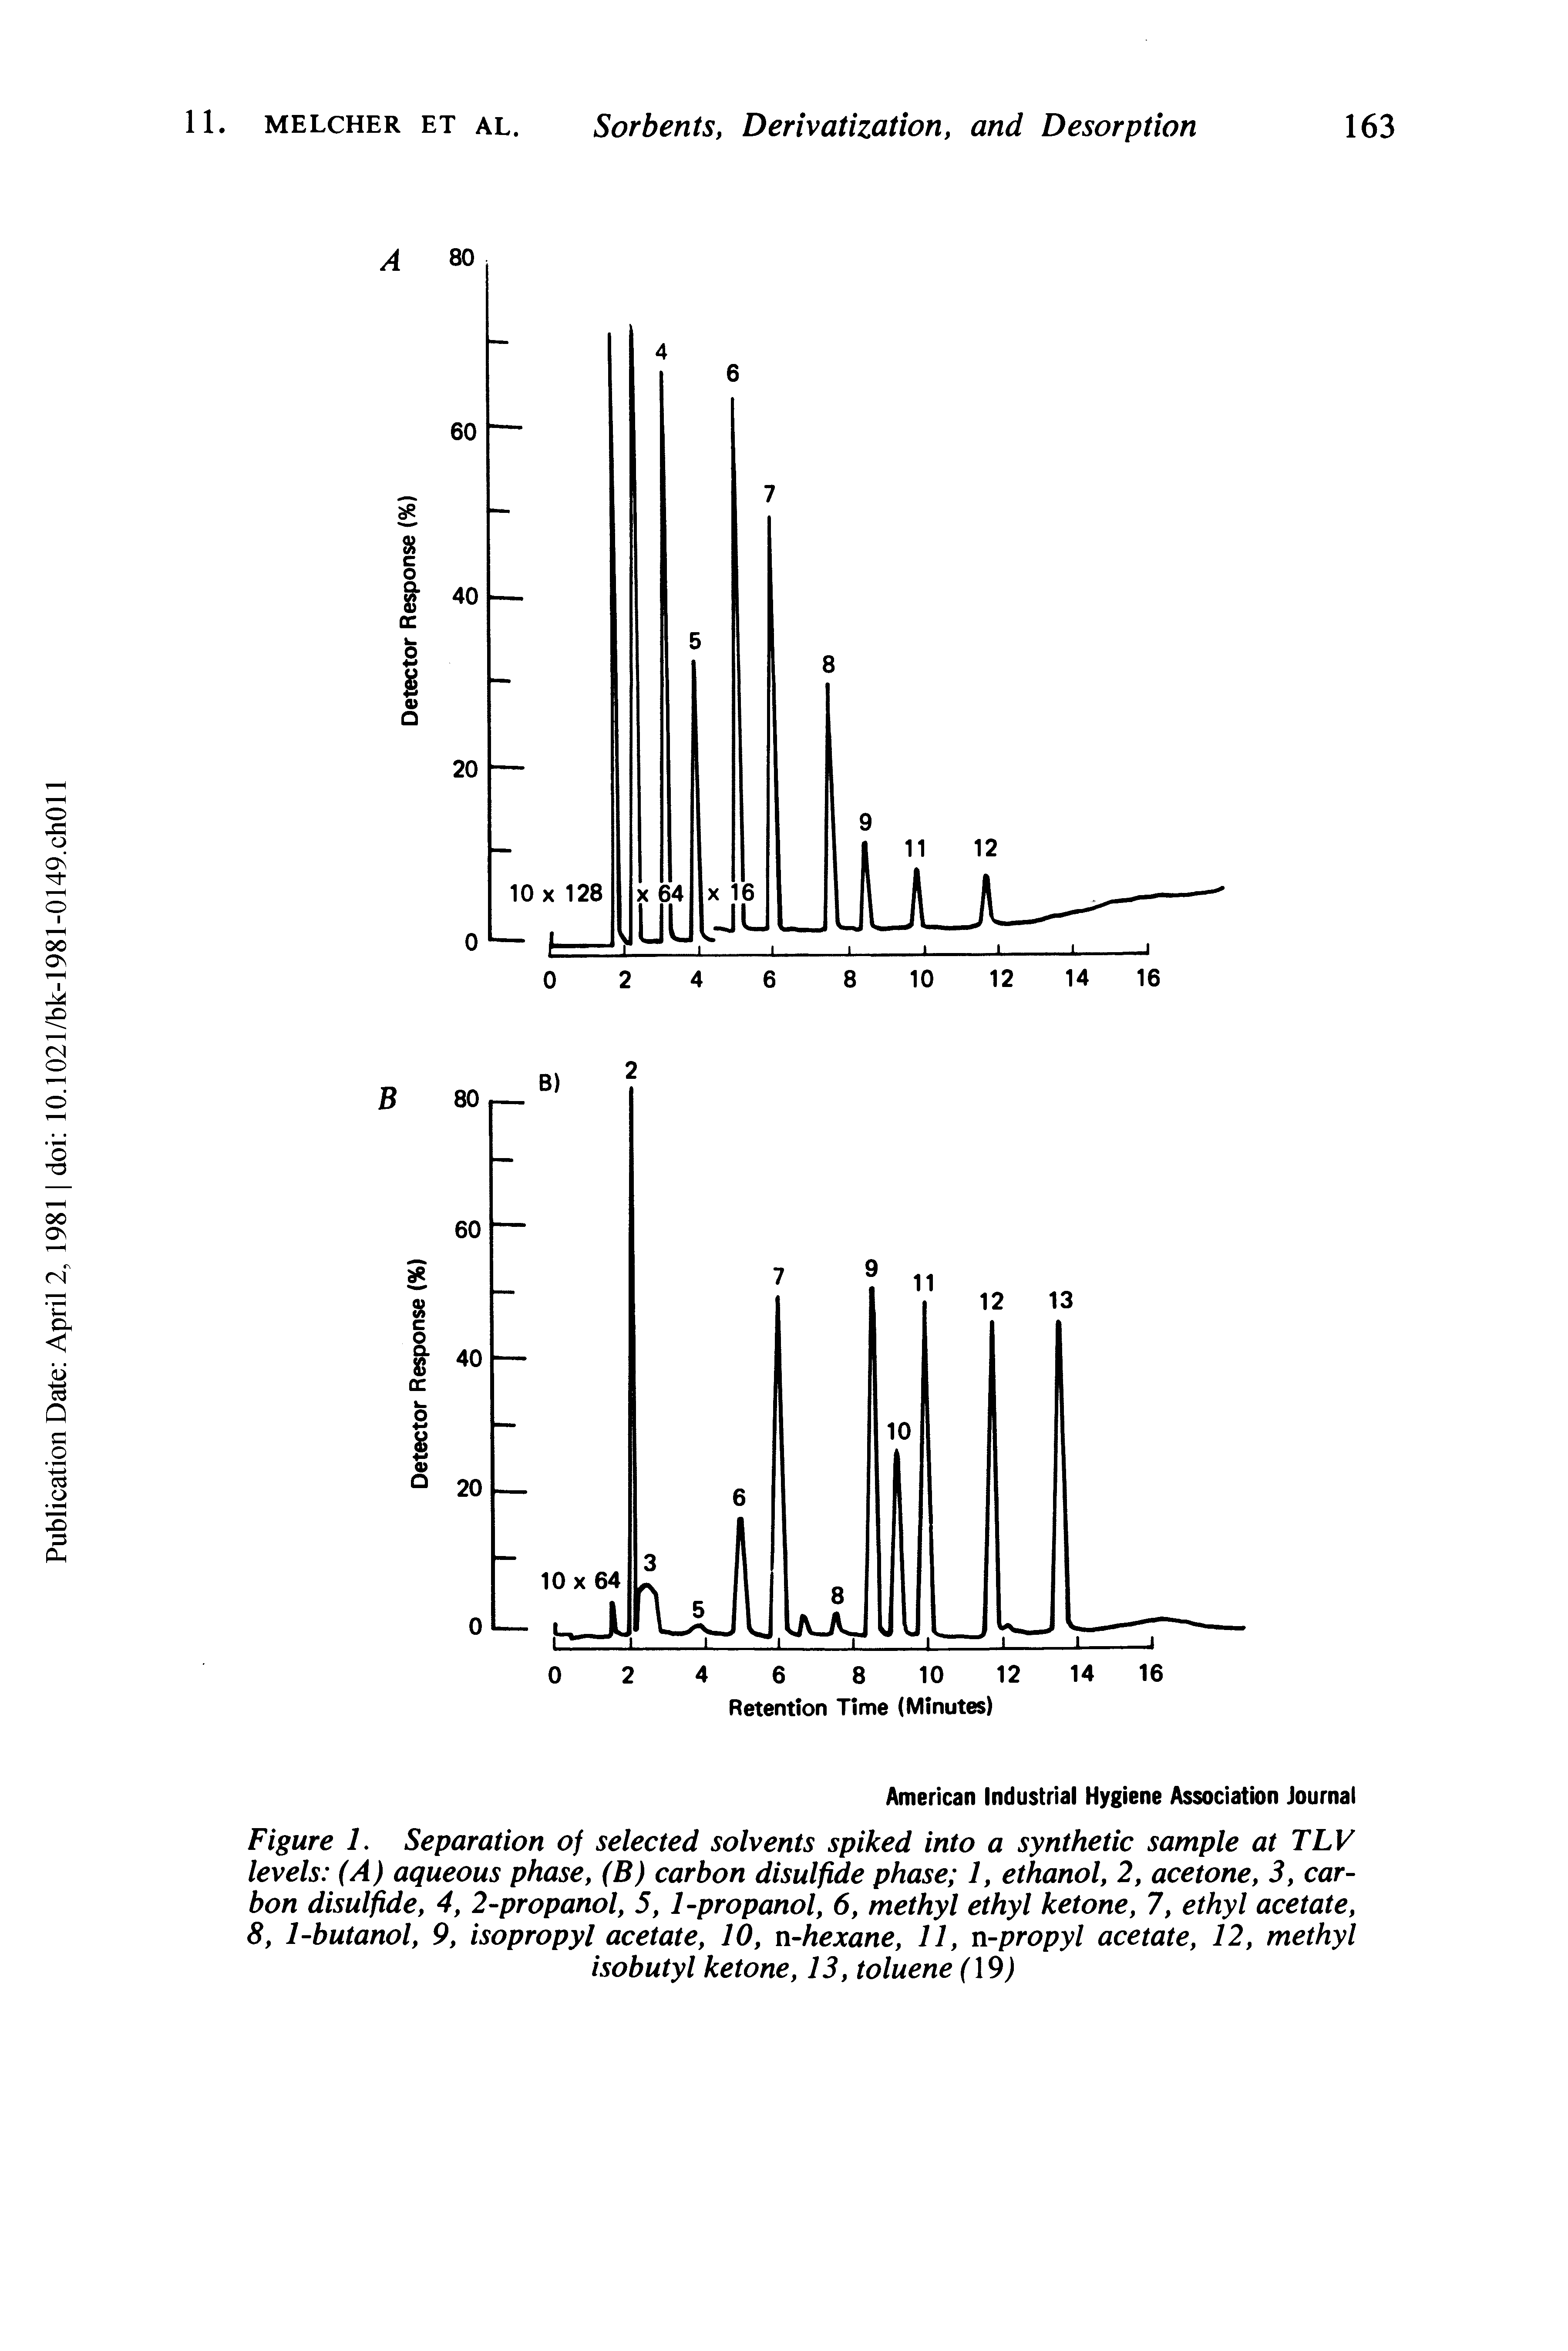 Figure 1. Separation of selected solvents spiked into a synthetic sample at TLV levels (A) aqueous phase, (B) carbon disulfide phase 1, ethanol, 2, acetone, 3, carbon disulfide, 4, 2-propanol, 5, 1-propanol, 6, methyl ethyl ketone, 7, ethyl acetate, 8, 1-butanol, 9, isopropyl acetate, 10, n-hexane, 11, n-propyl acetate, 12, methyl isobutyl ketone, 13, toluene (19)...